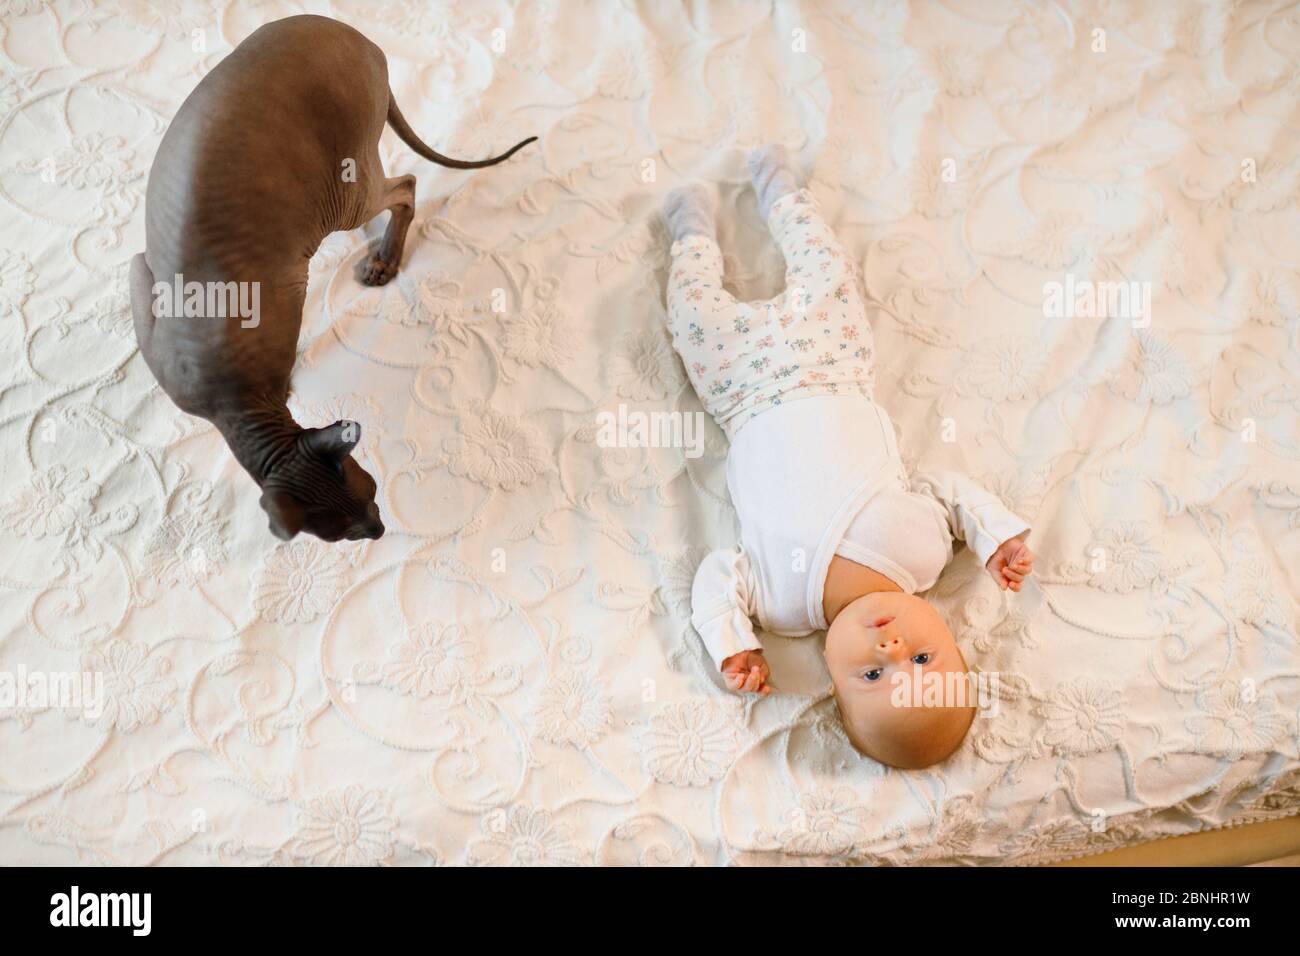 Large sphynx cat sits near baby toddler on white bed Stock Photo